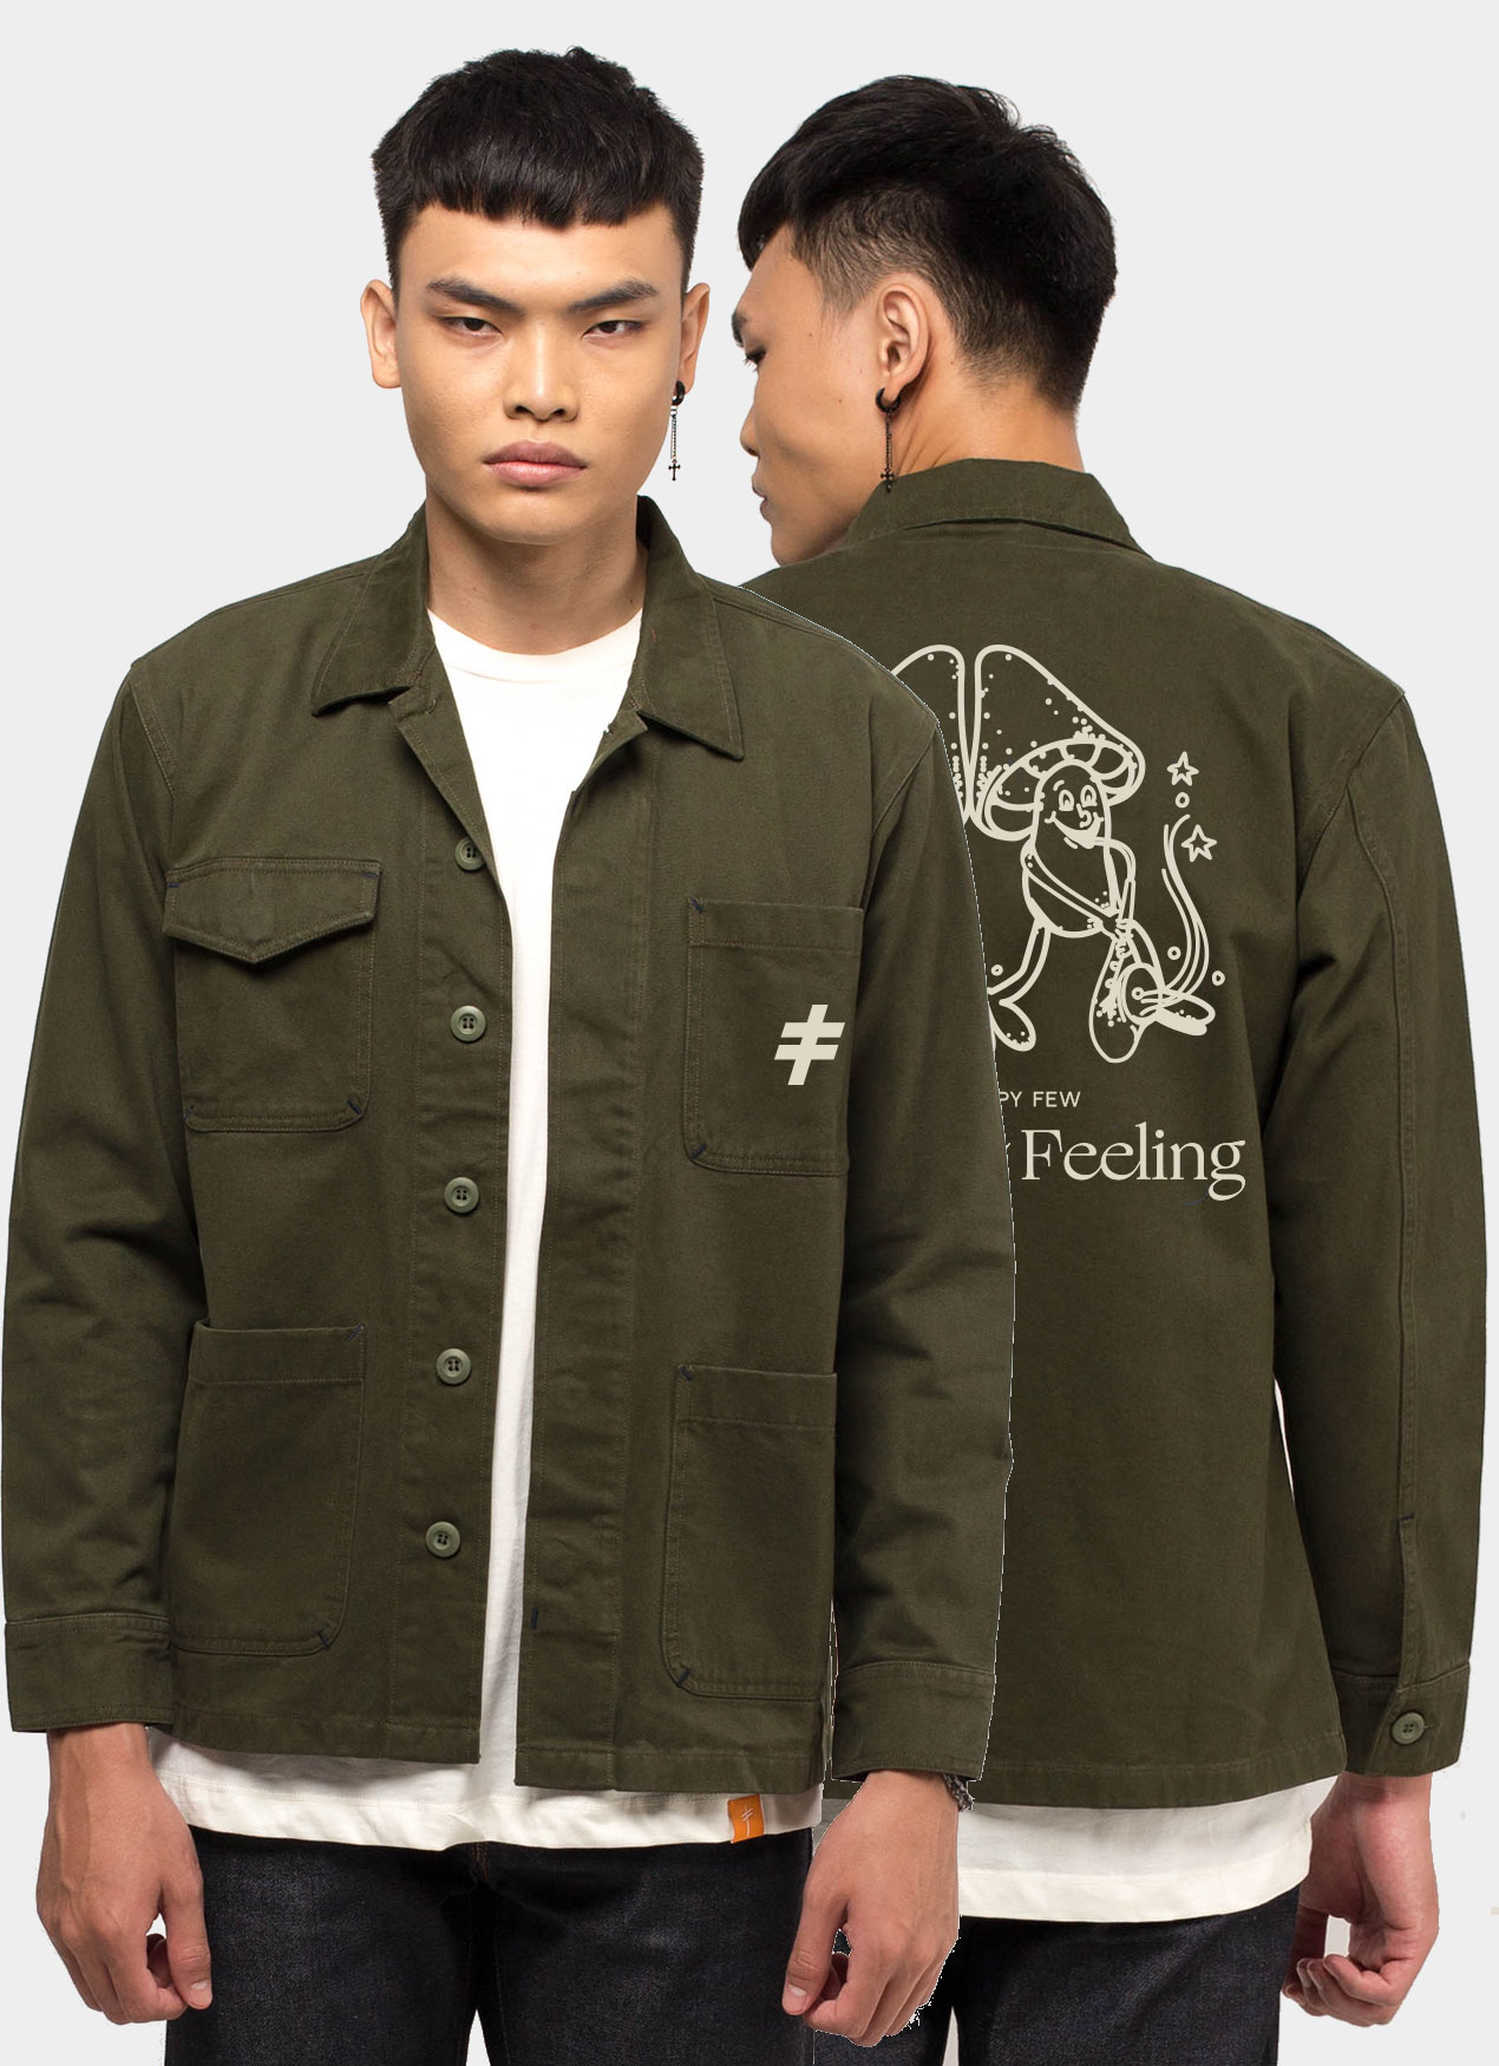 Product Men - Jackets - Home Chore Jacket Army Green Army Green